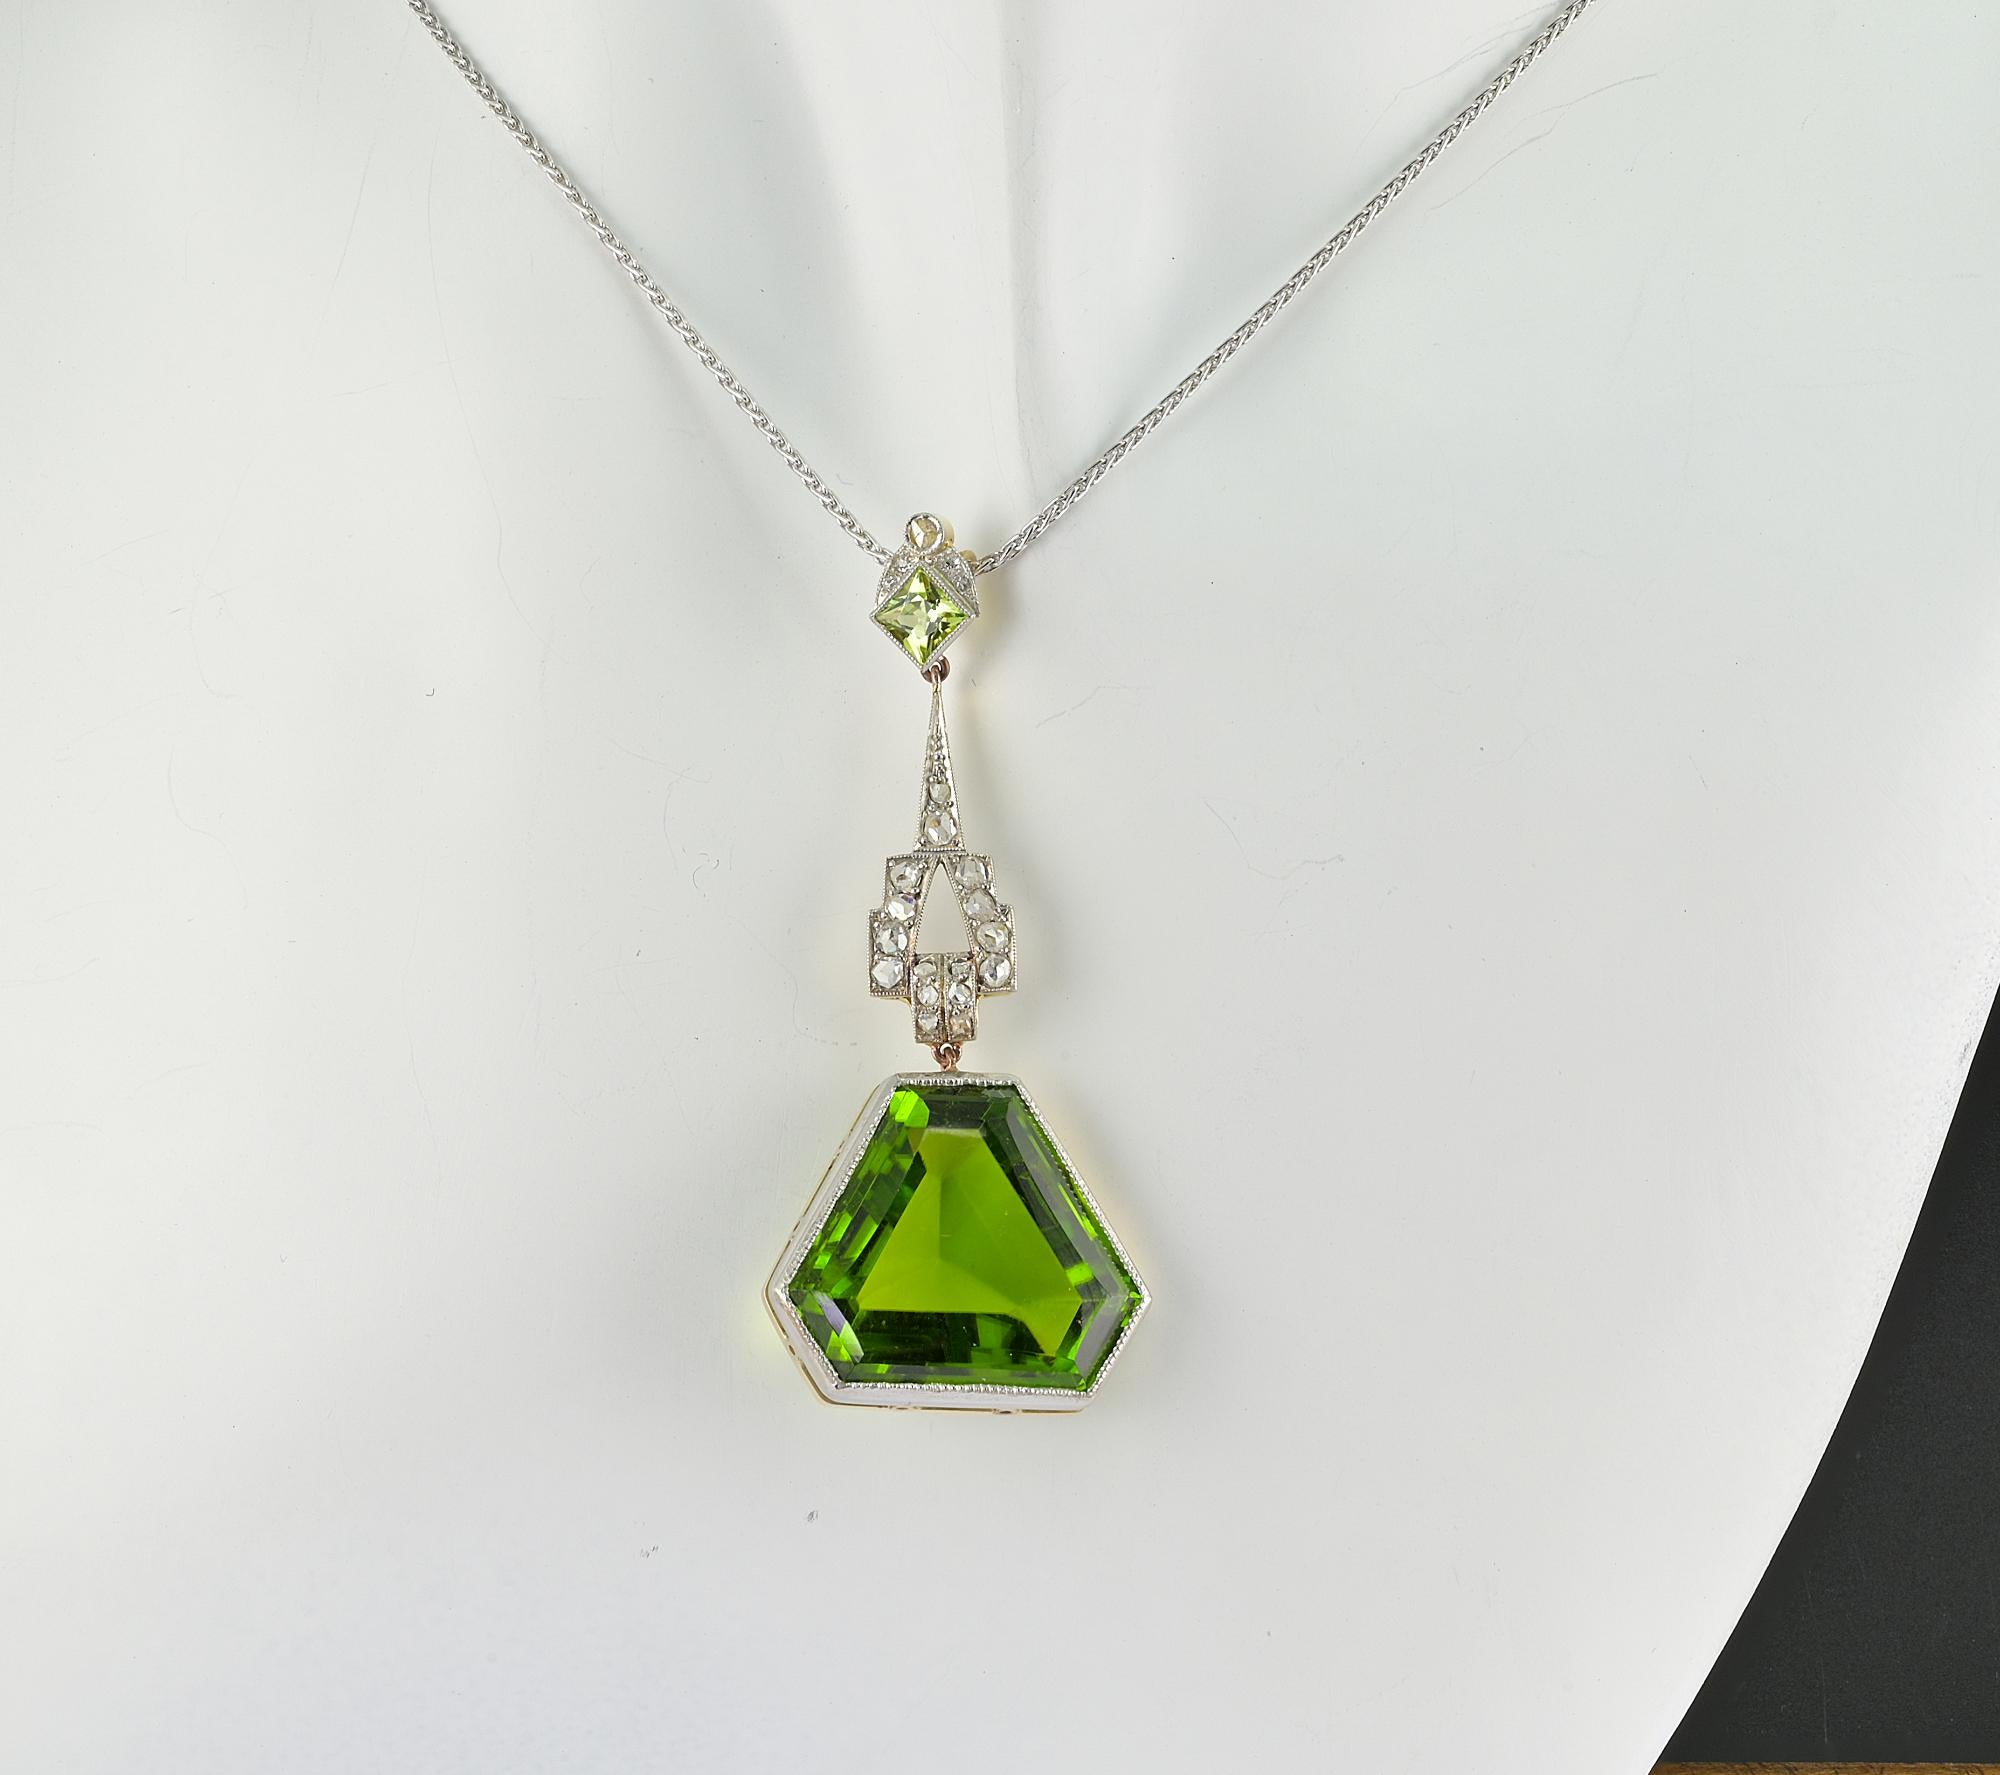 This stunning antique pendant is 1925 circa
Skillfully hand created during the Deco period of solid 18 KT gold Platinum topped
Breath taking in design expressed in elegant mixed geometries between the top articulated Diamond line and the large